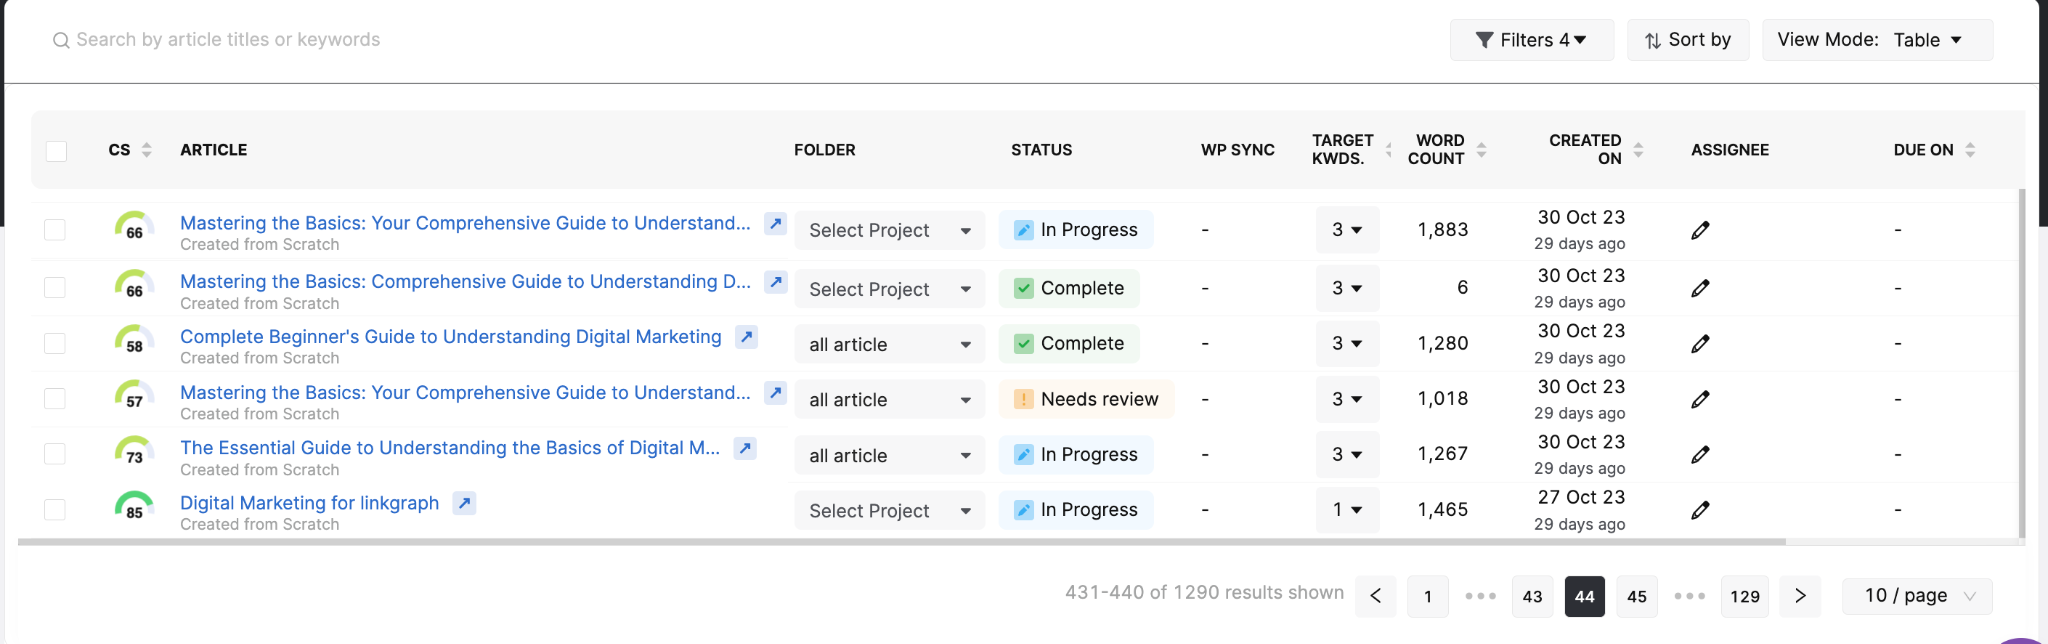 A screenshot of a Content Optimizer's project management dashboard showing a list of articles with status, word count, and various other details.